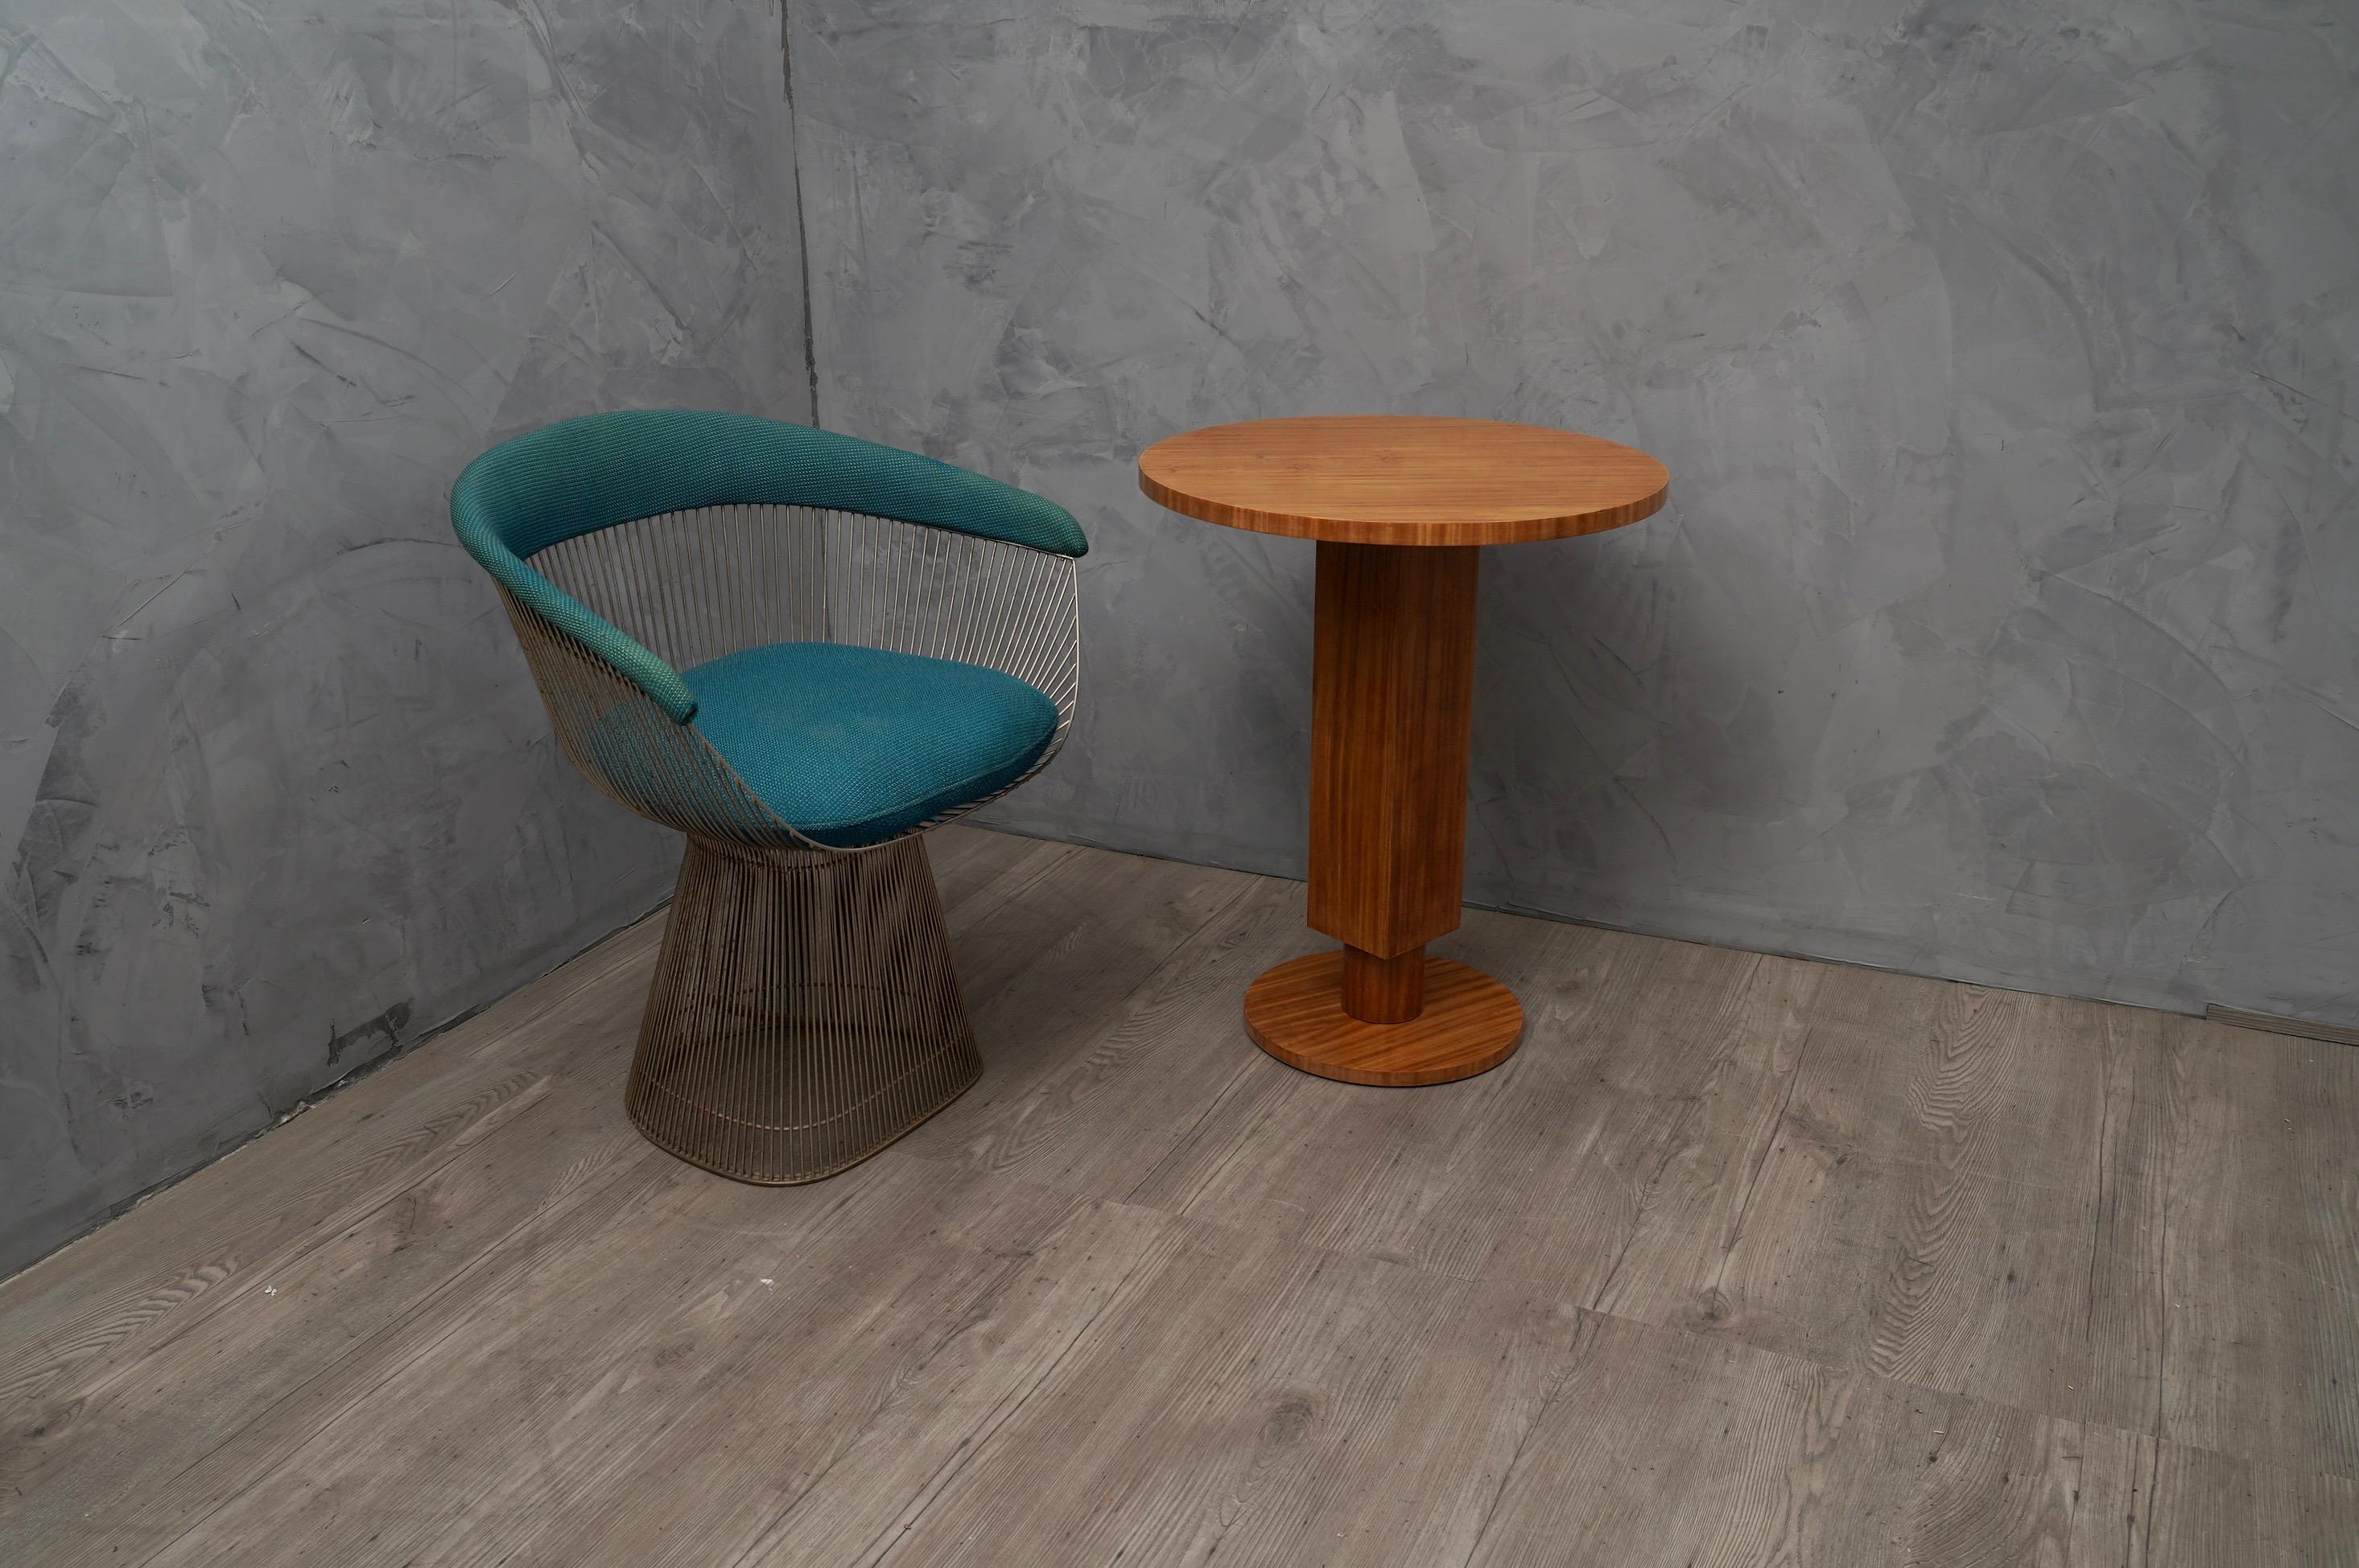 Pair of Classic Art Deco French side tables. 

All veneered in cedar wood. Round in the shape. The circular top, with a beautiful wood grain, is supported by an underlying leg with a square base, also veneered in cedar wood. Still under a round base